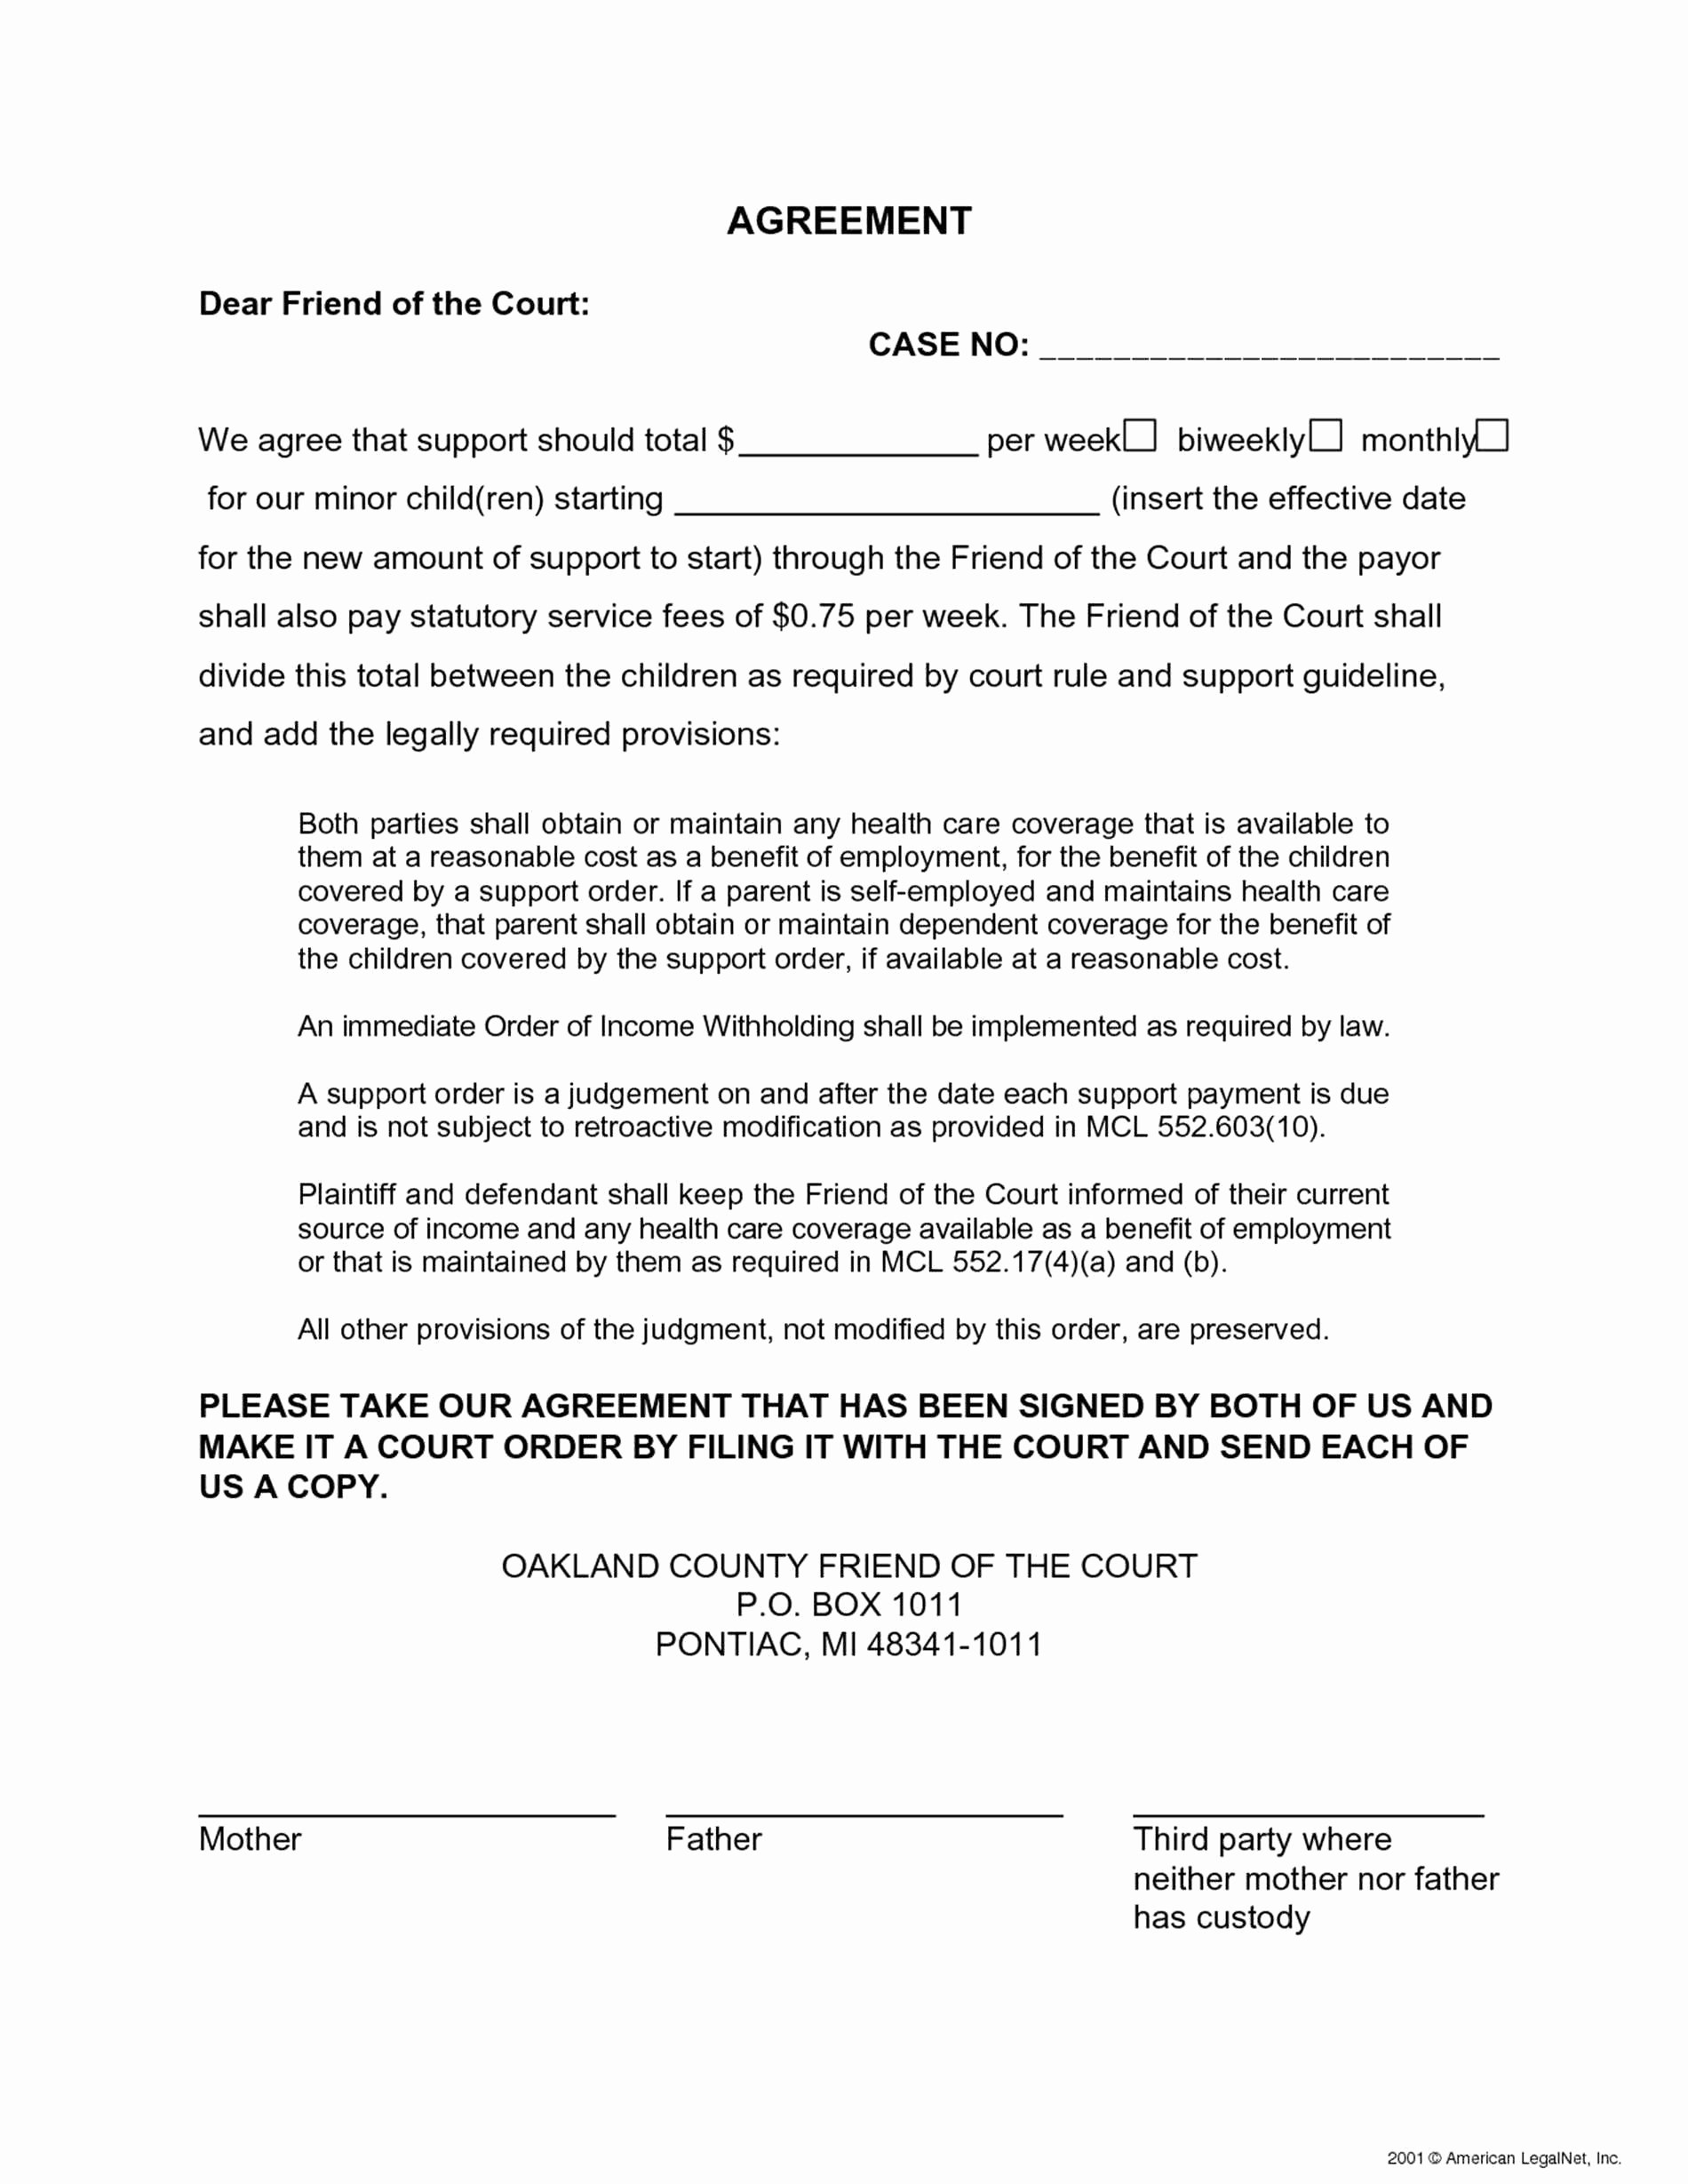 Child Support Agreement Template New Child Support Letter Agreement Template Download